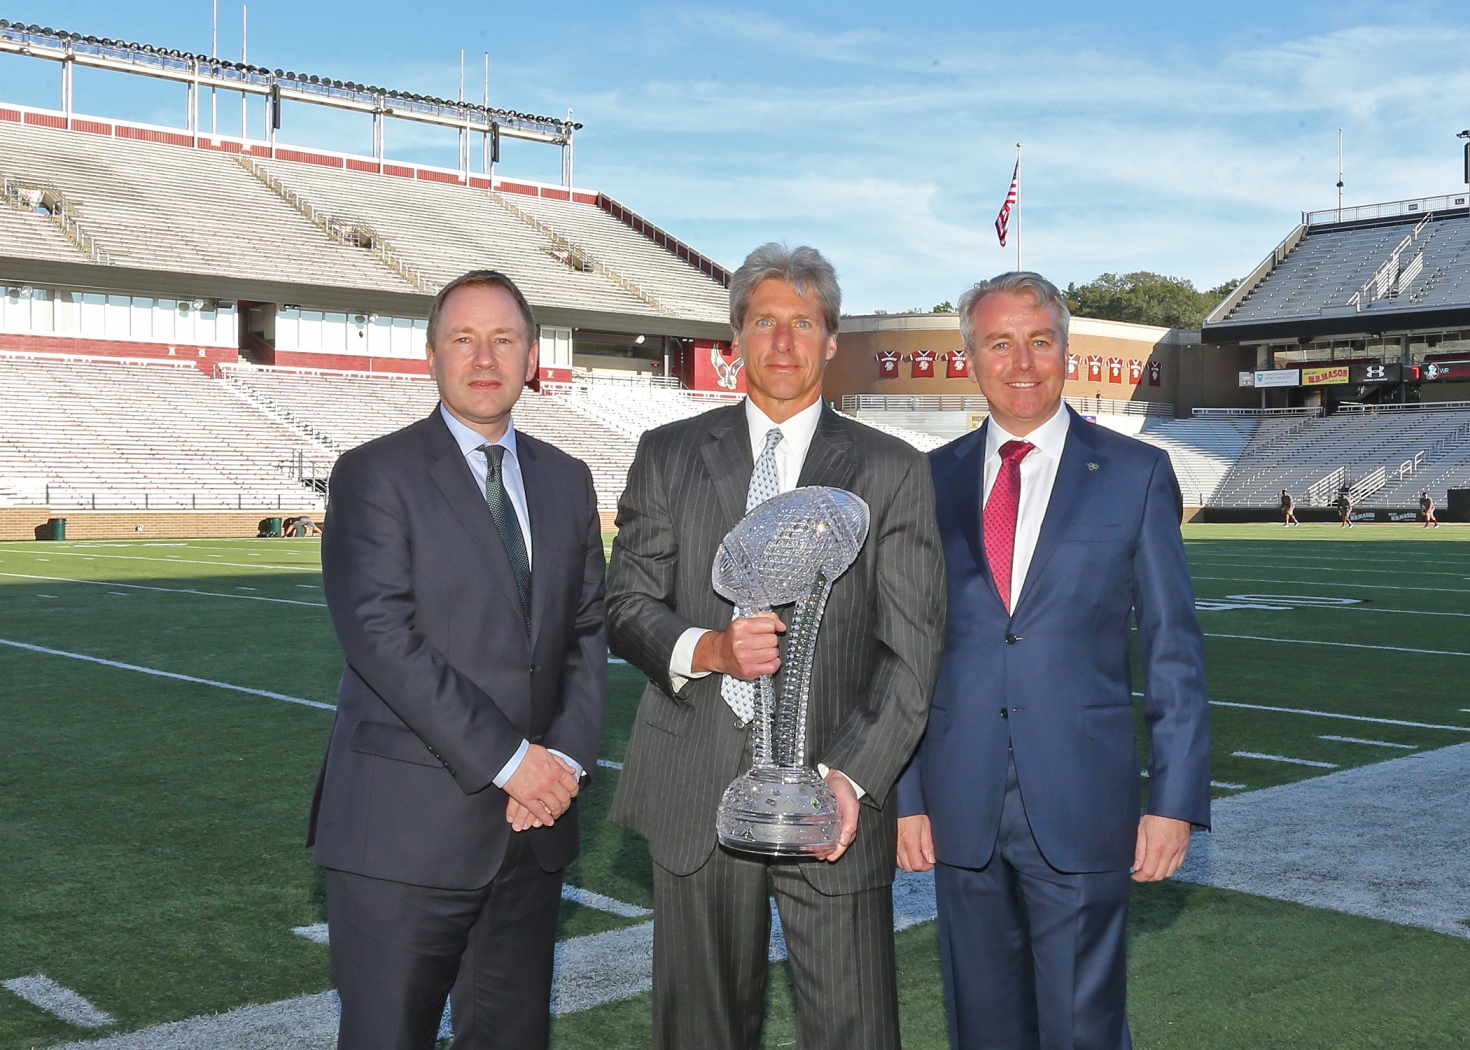 Pictured at the presentation of the Keough-Naughton Trophy at Boston College were L-R: Stephen Kavanagh, CEO Aer Lingus; Brad Bates, Boston College Director of Athletics; and Neil Naughton, chairman of the Aer Lingus College Football Classic steering committee.